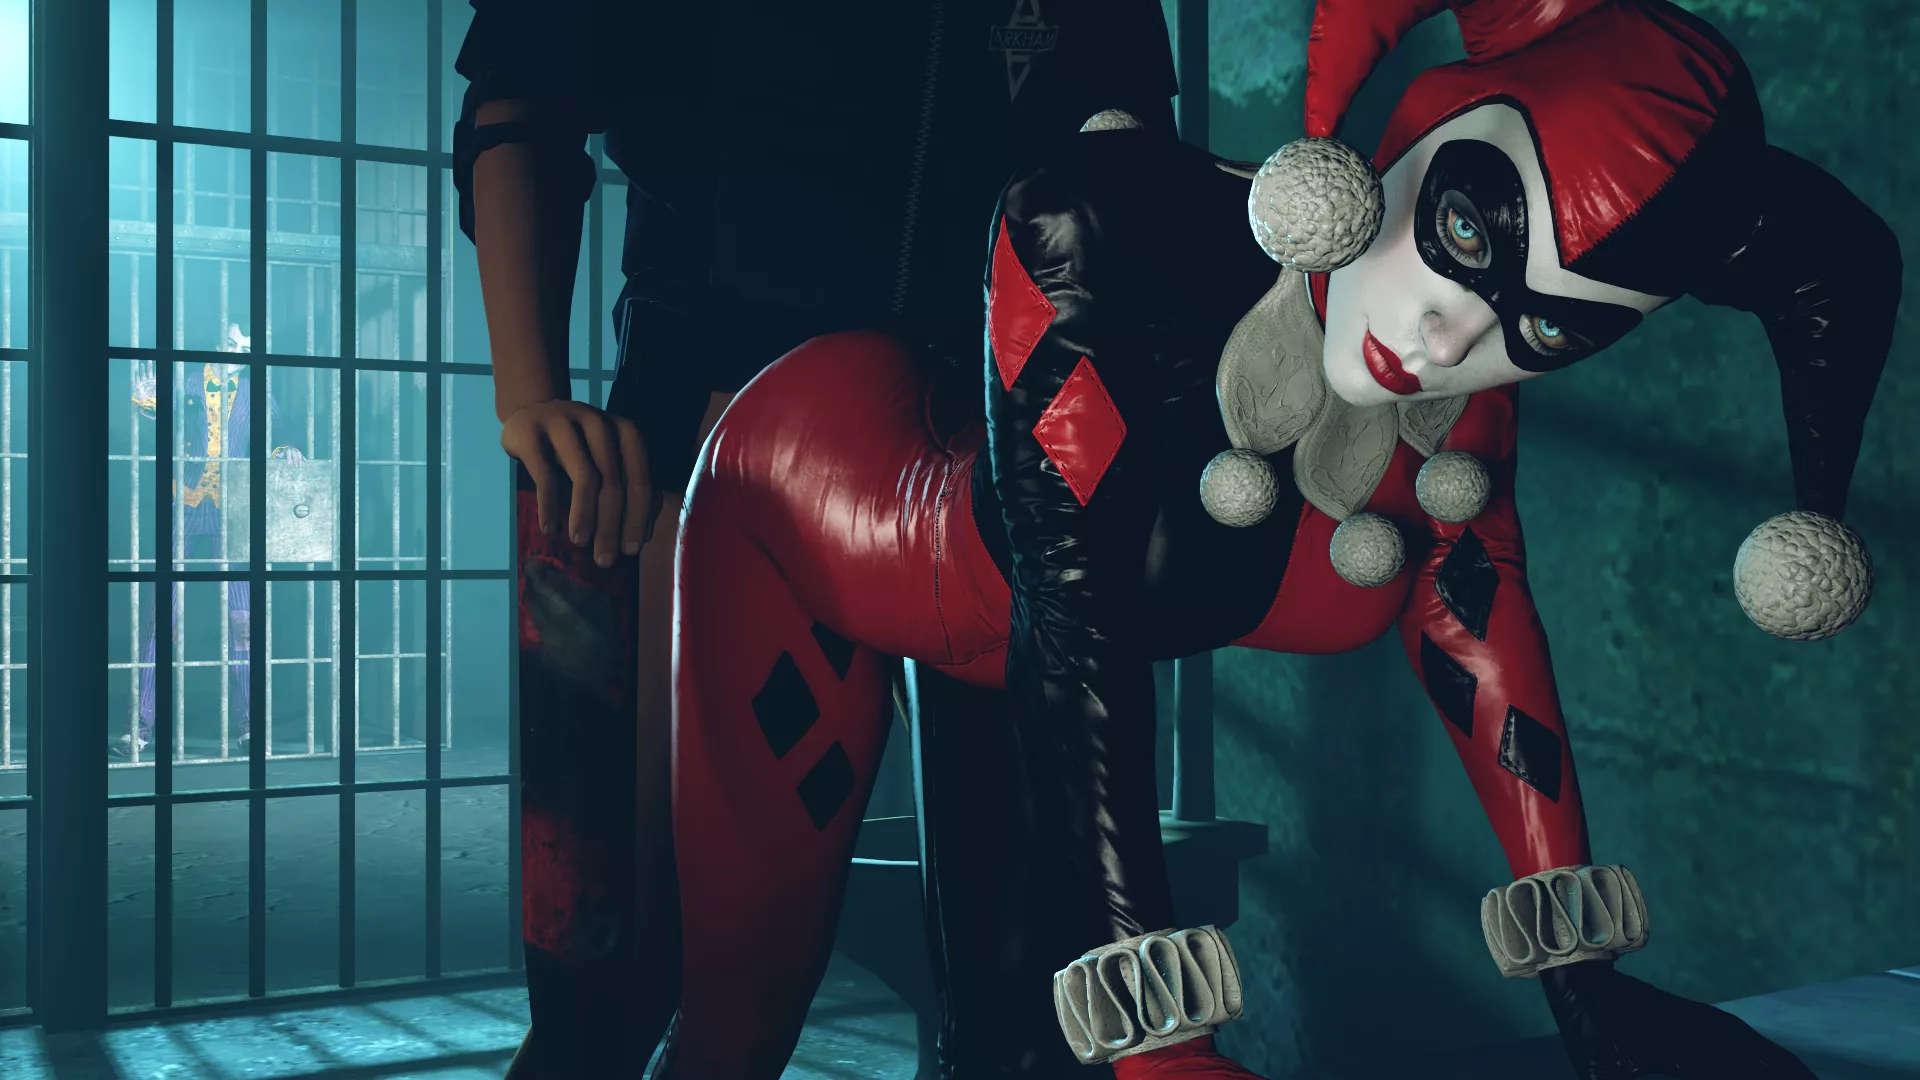 Harley Quinn Porn Pictures